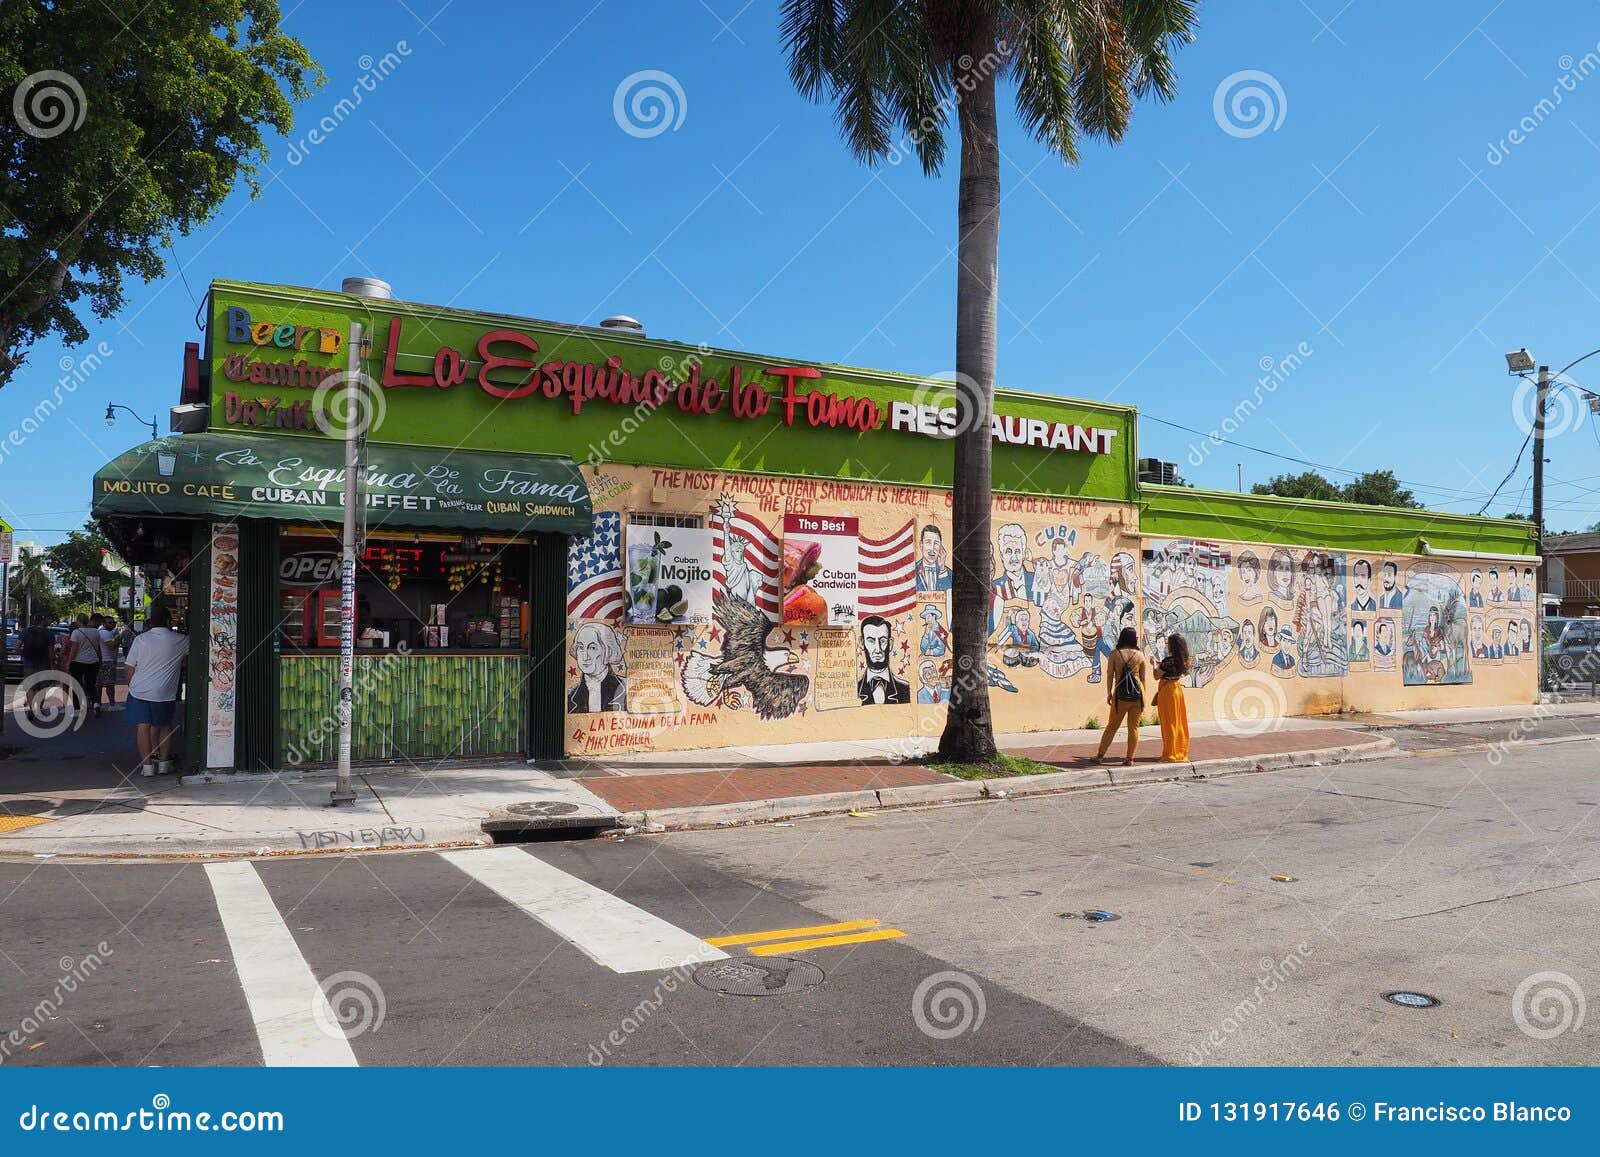 Miami`s Little Havana And Calle Ocho, Florida. Editorial Photo - Image of city, eigth: 131917646